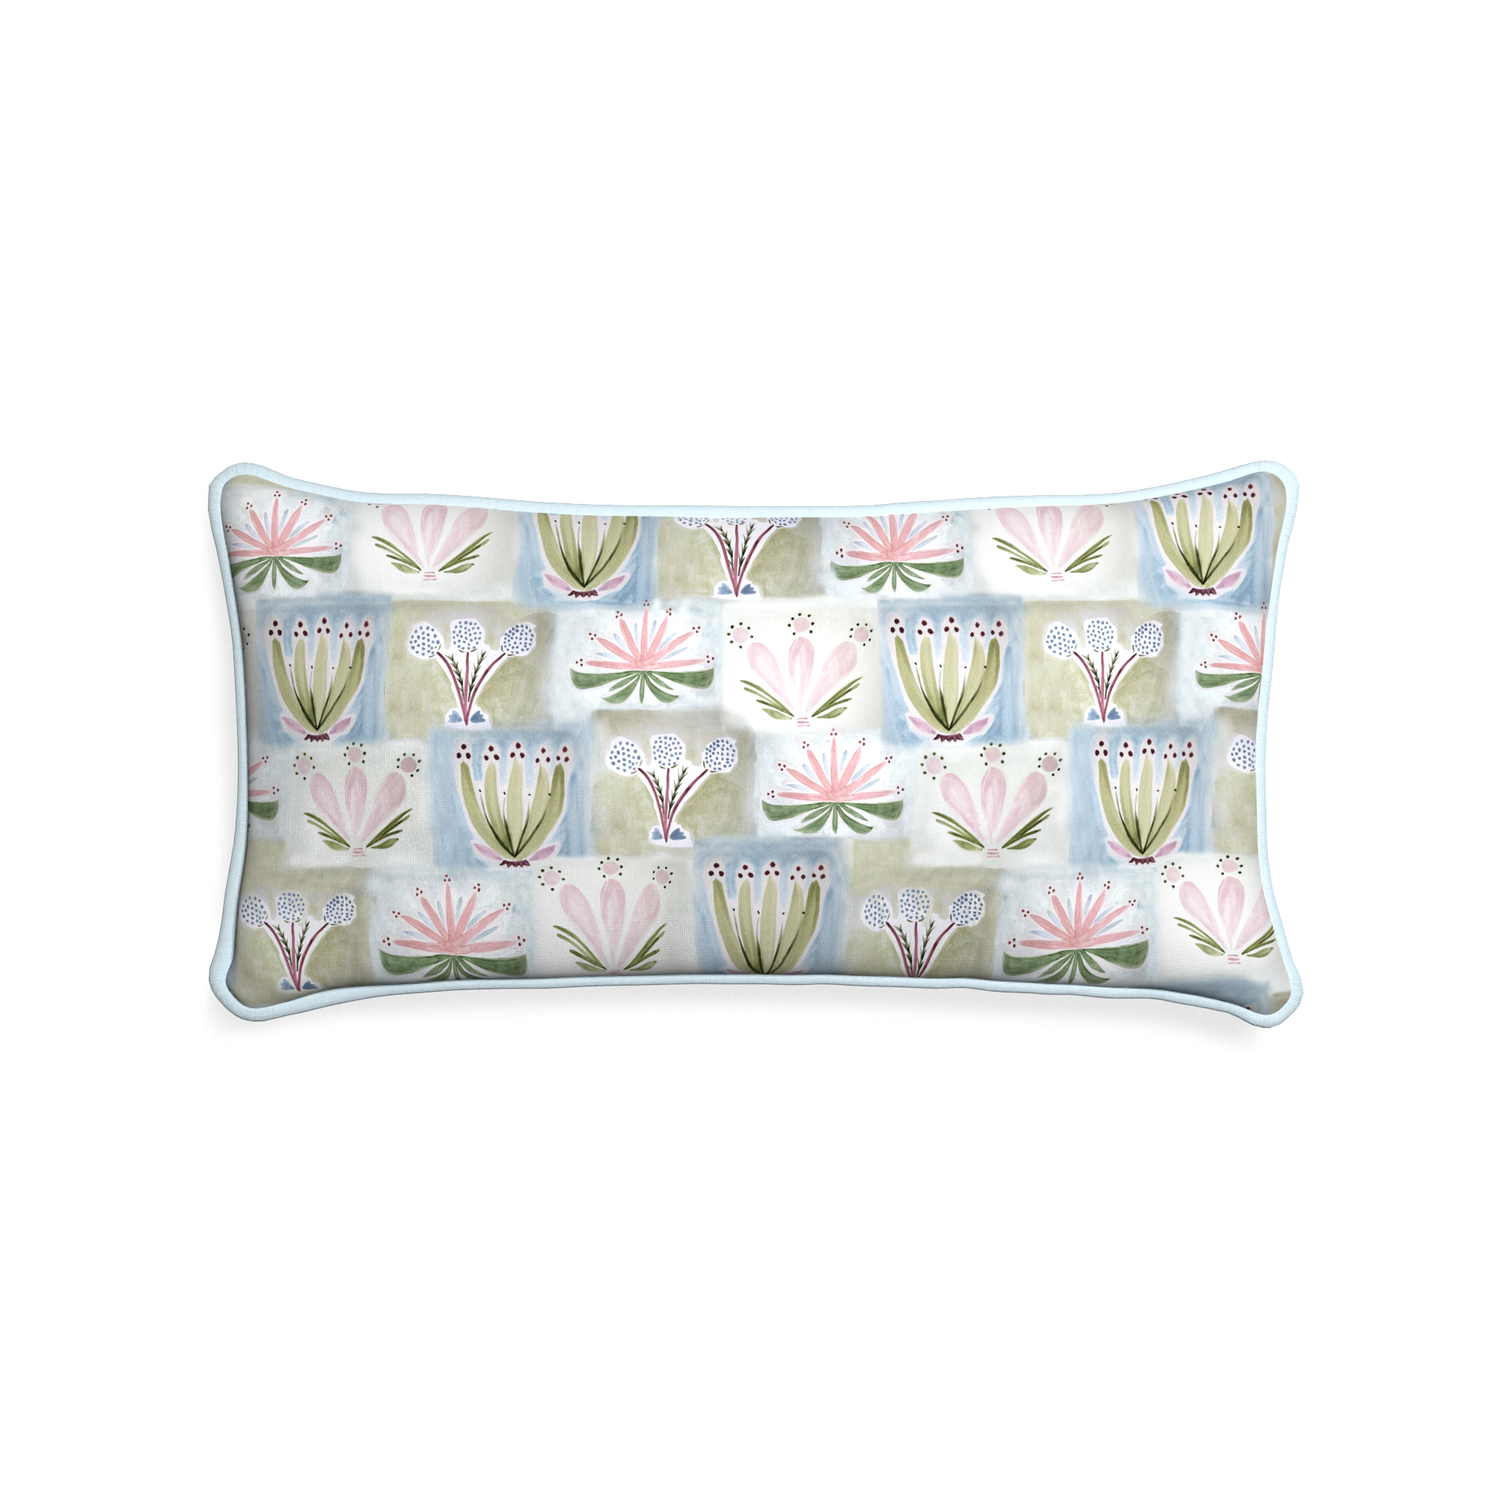 Midi-lumbar harper custom hand-painted floralpillow with powder piping on white background